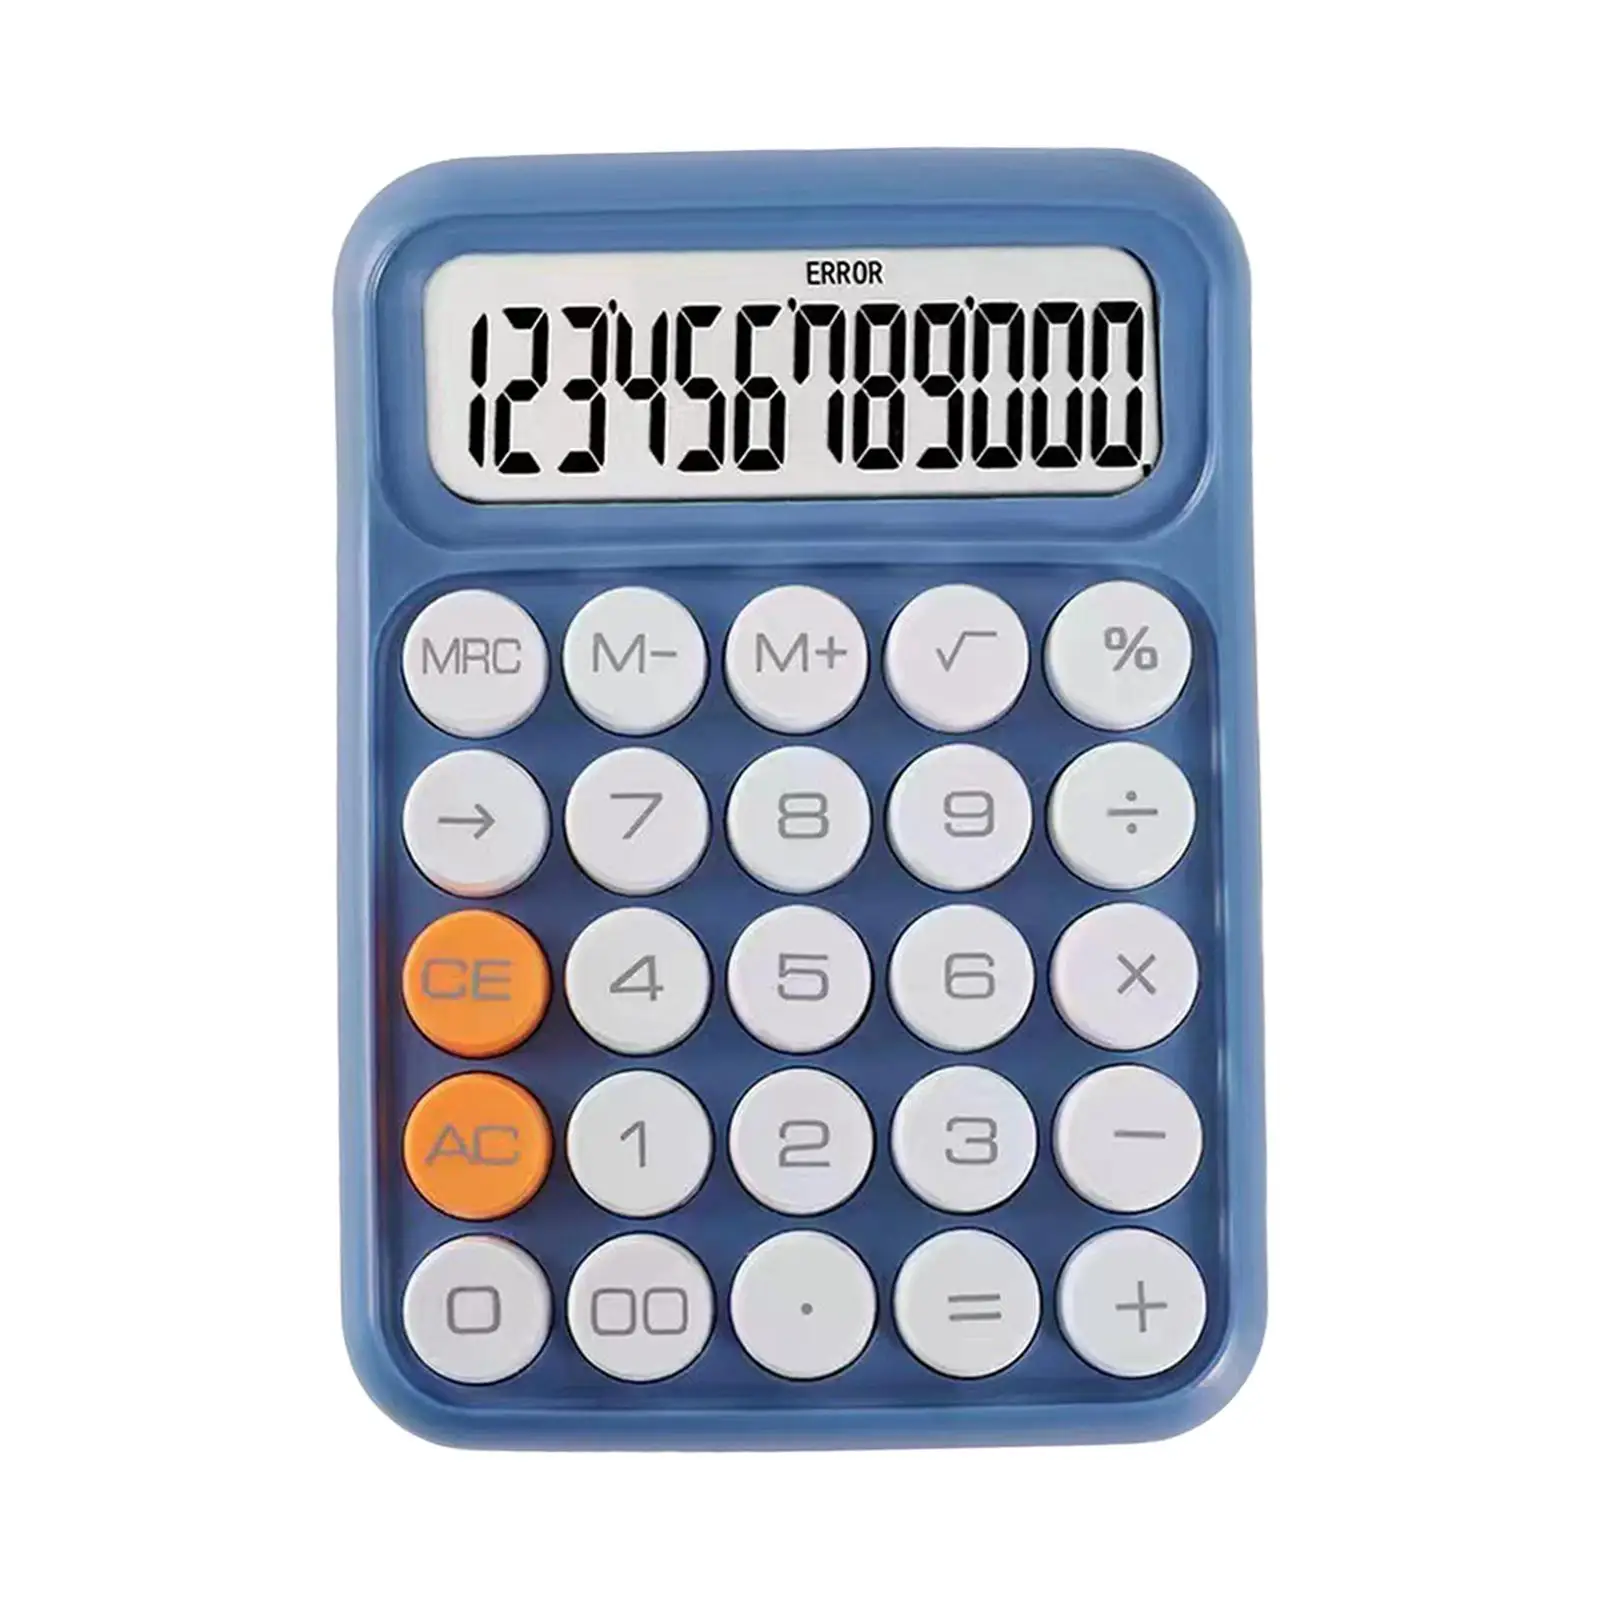 12 Digit Calculator Lightweight Cute Handheld Multifunctional Office Calculators for Travel Business Use Office Home Accounting